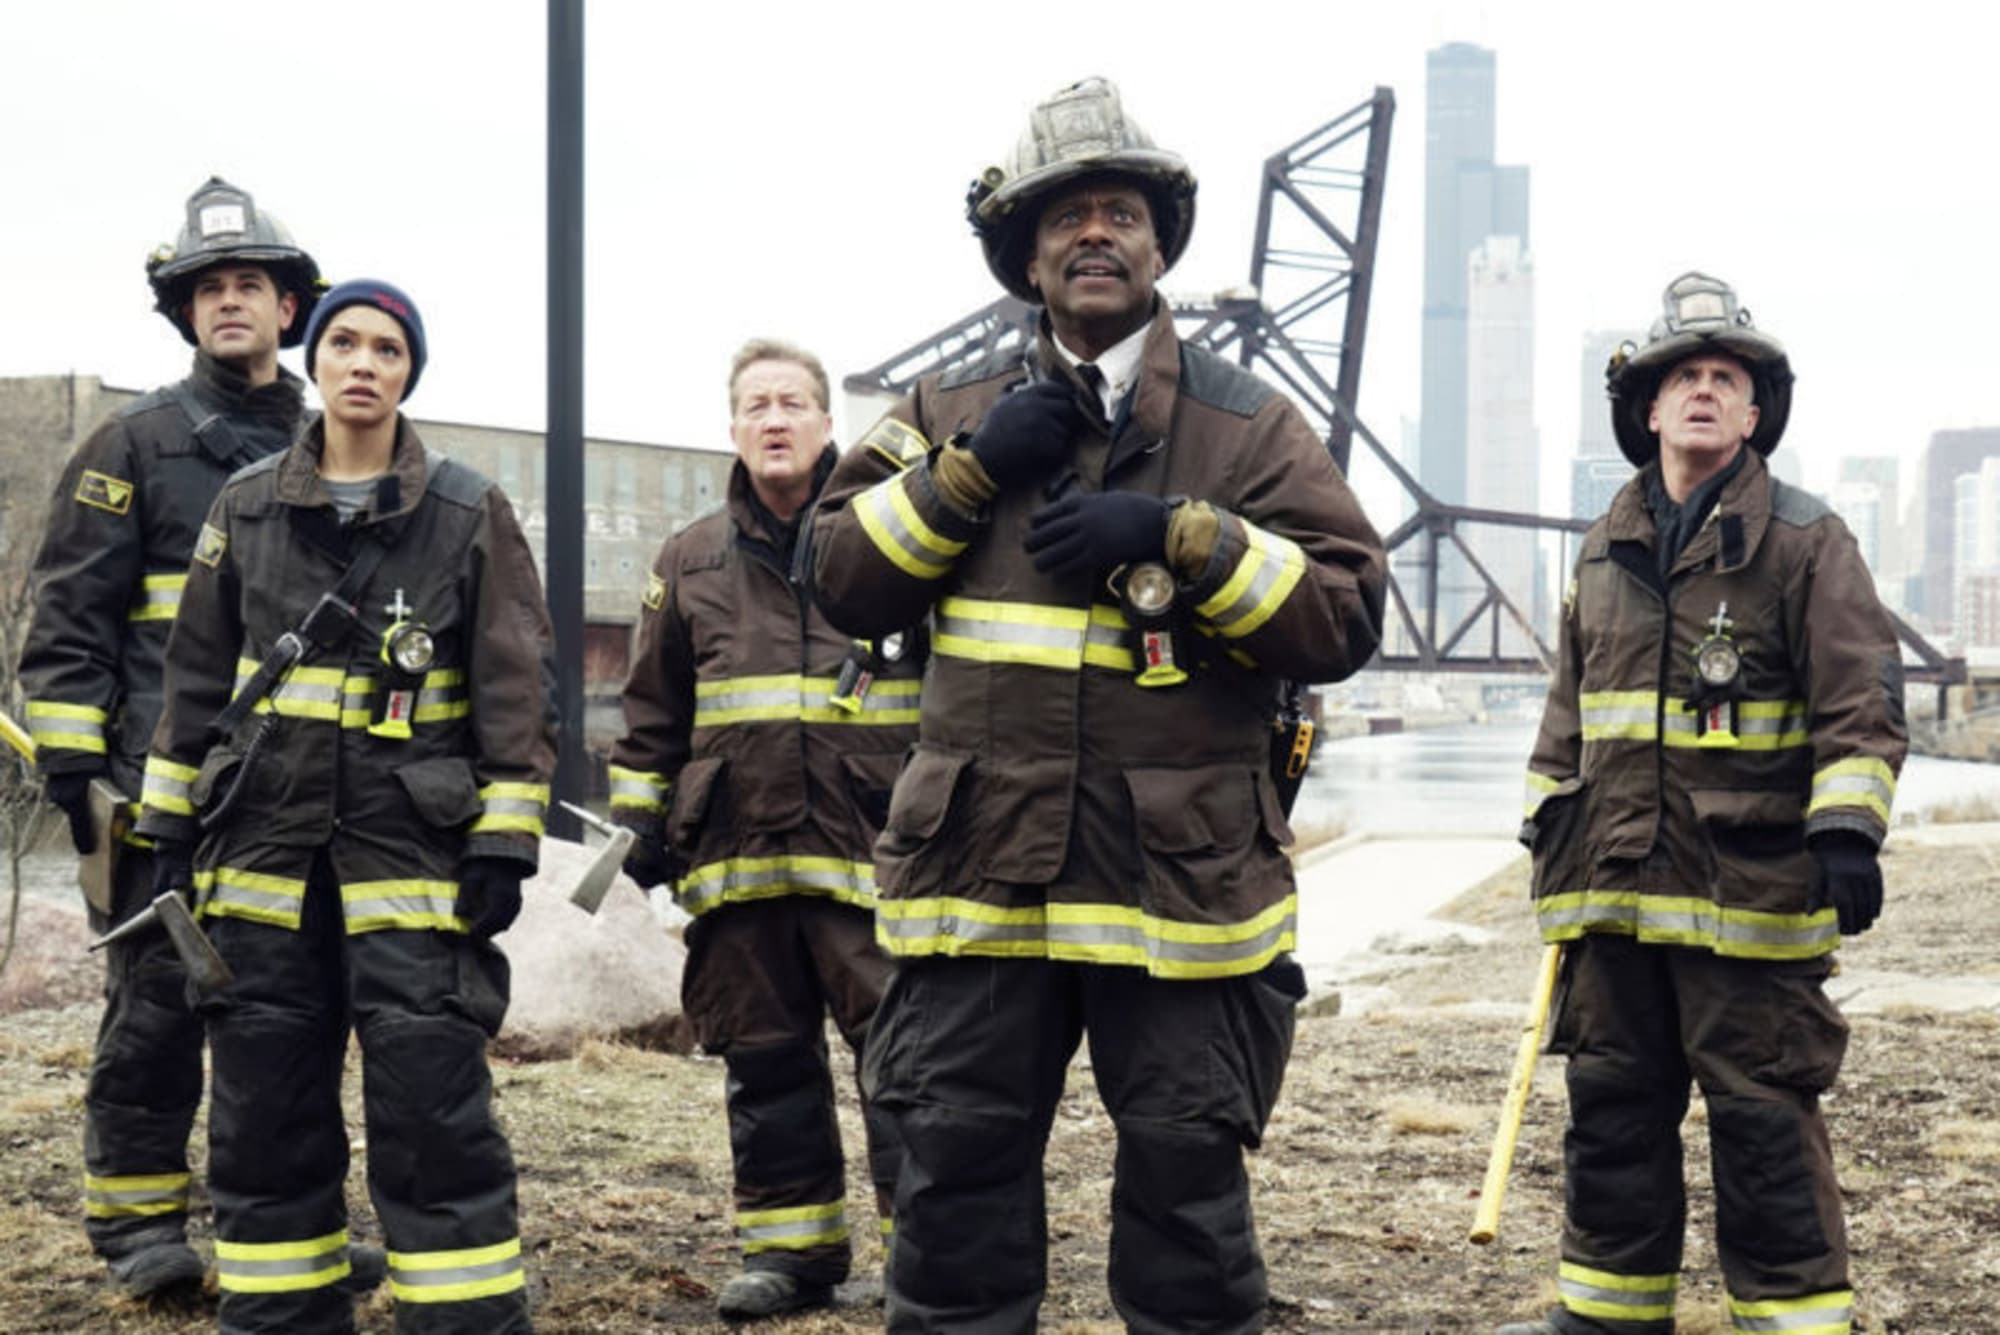 Chicago Fire season 6, episode 16 recap: The One That Matters Most